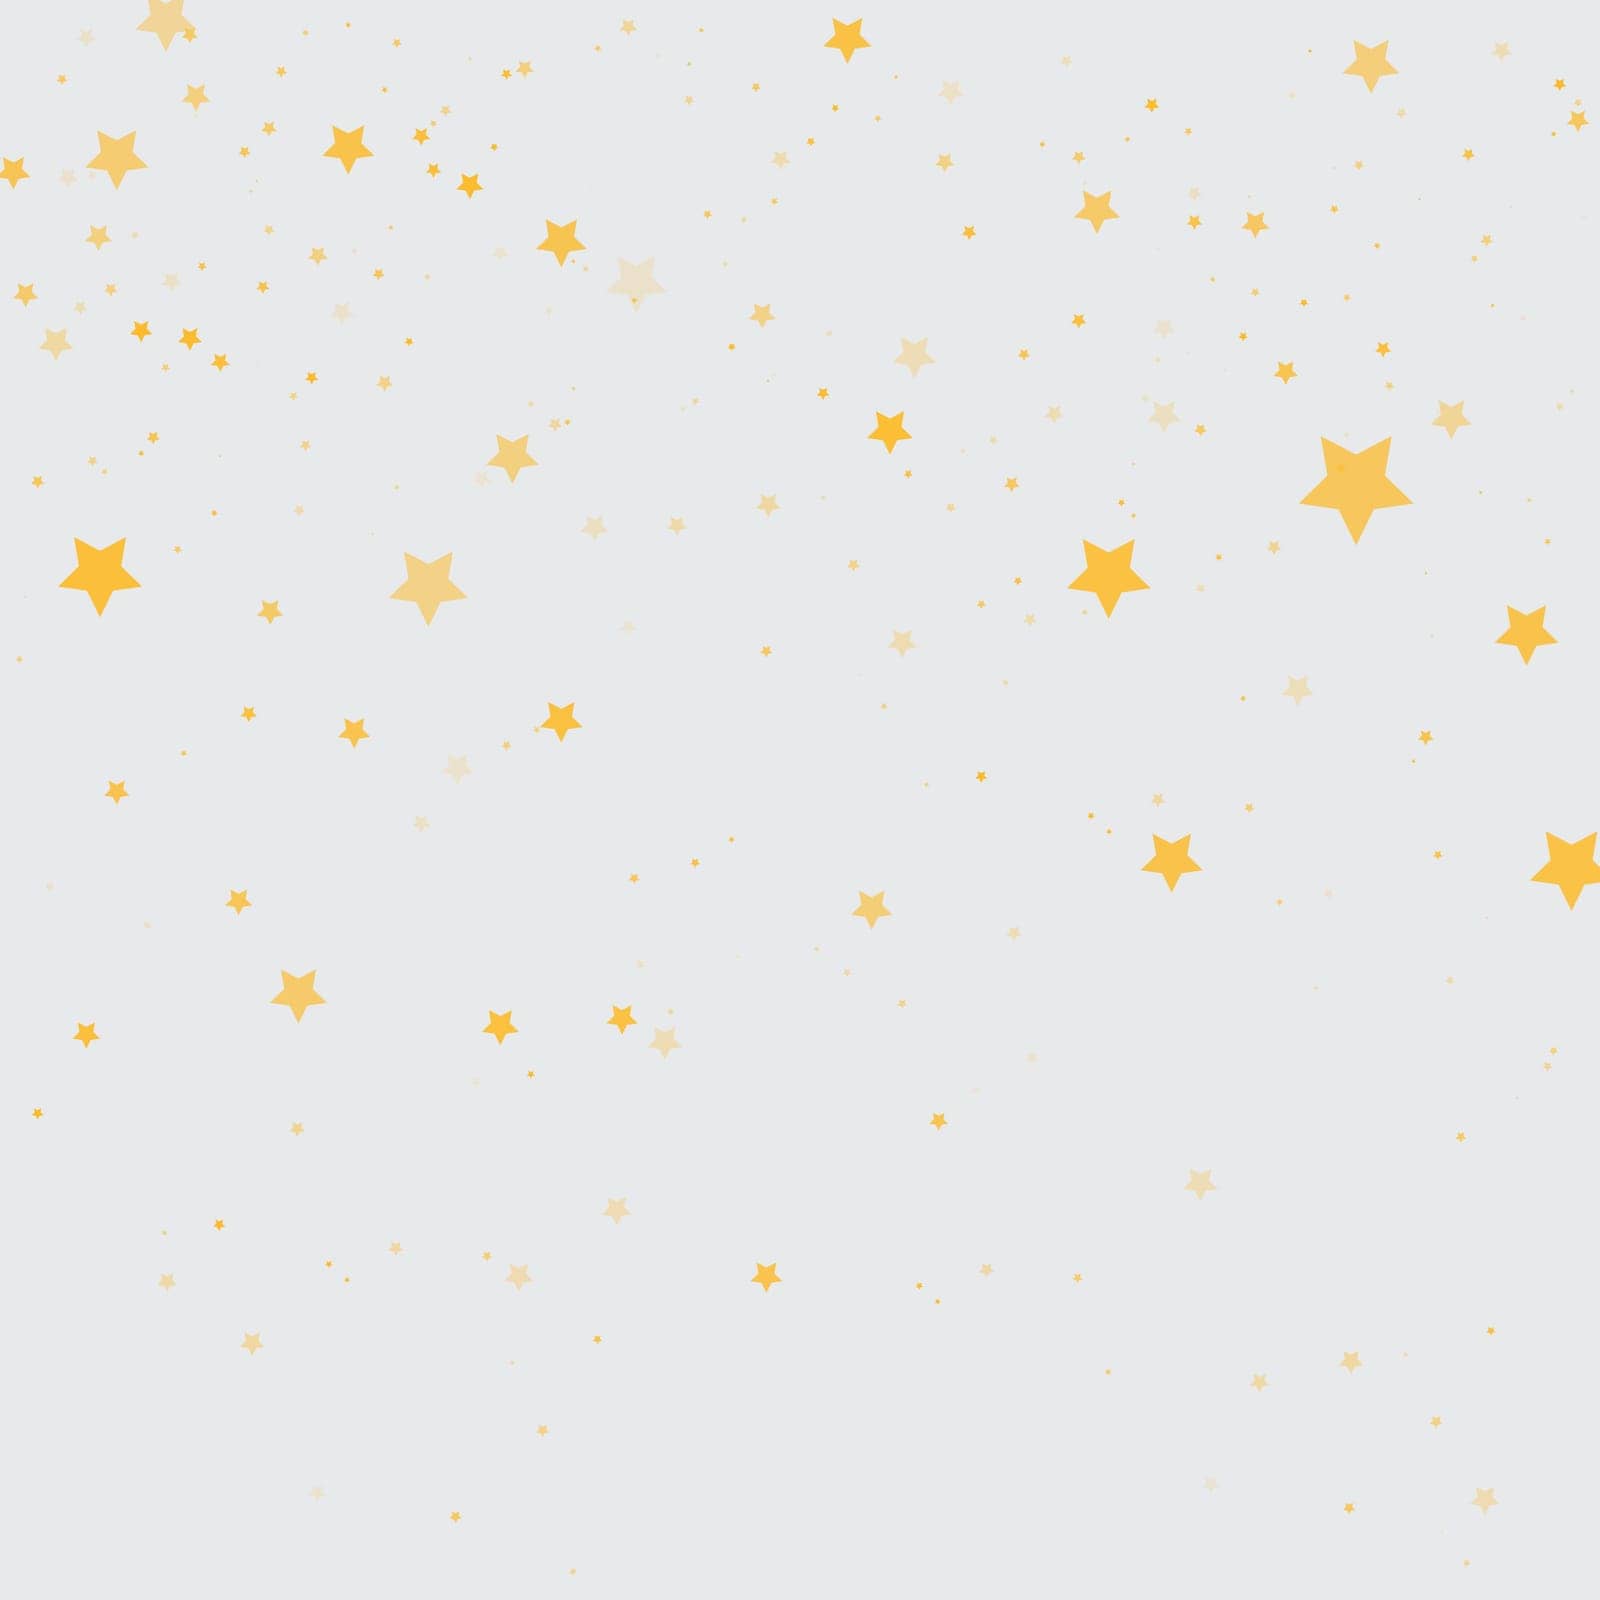 Random falling gold stars on white background. Glitter pattern for banner, greeting card, Christmas and New Year card,